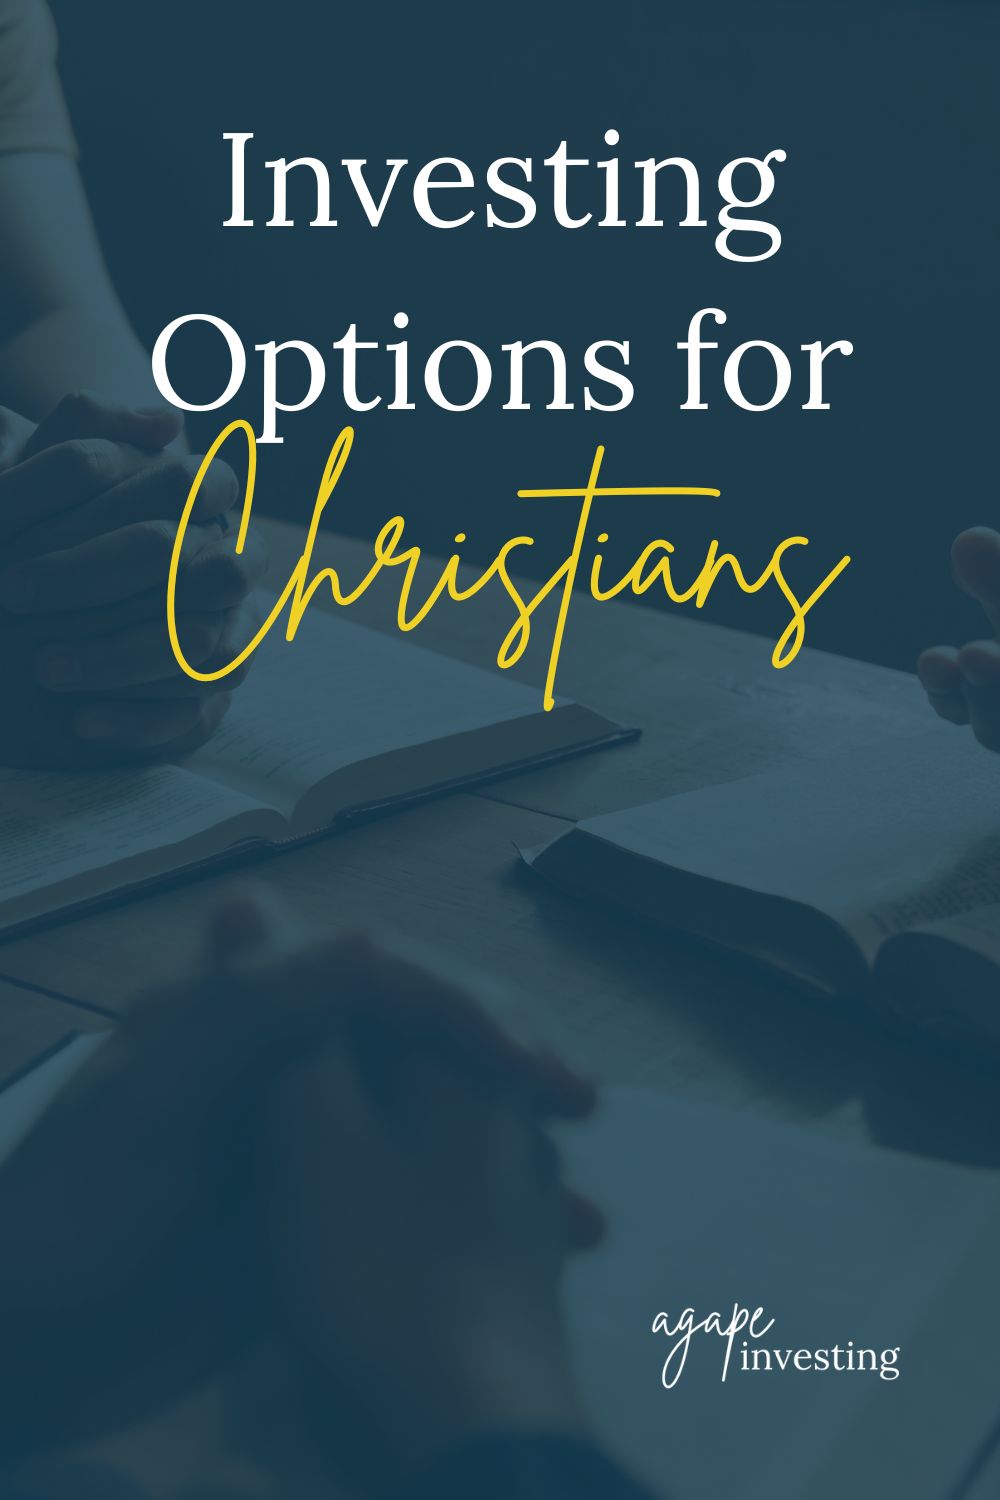 Learn what options you have when it comes to investing your money in a way that aligns with your faith. 